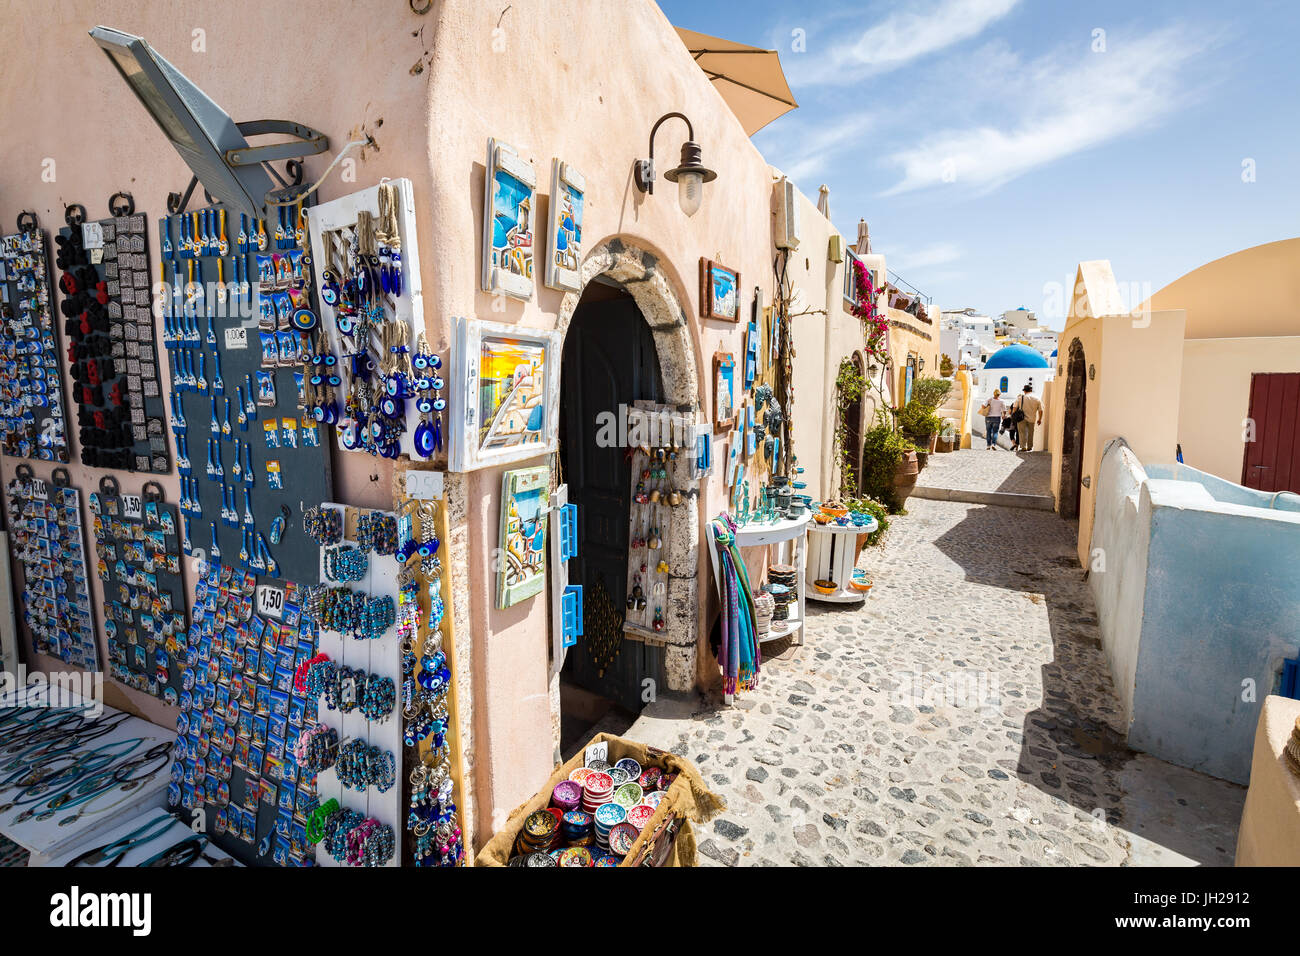 Souvenir shops selling pictures, magnets and jewellery in Oia, Santorini, Cyclades, Greek Islands, Greece, Europe Stock Photo